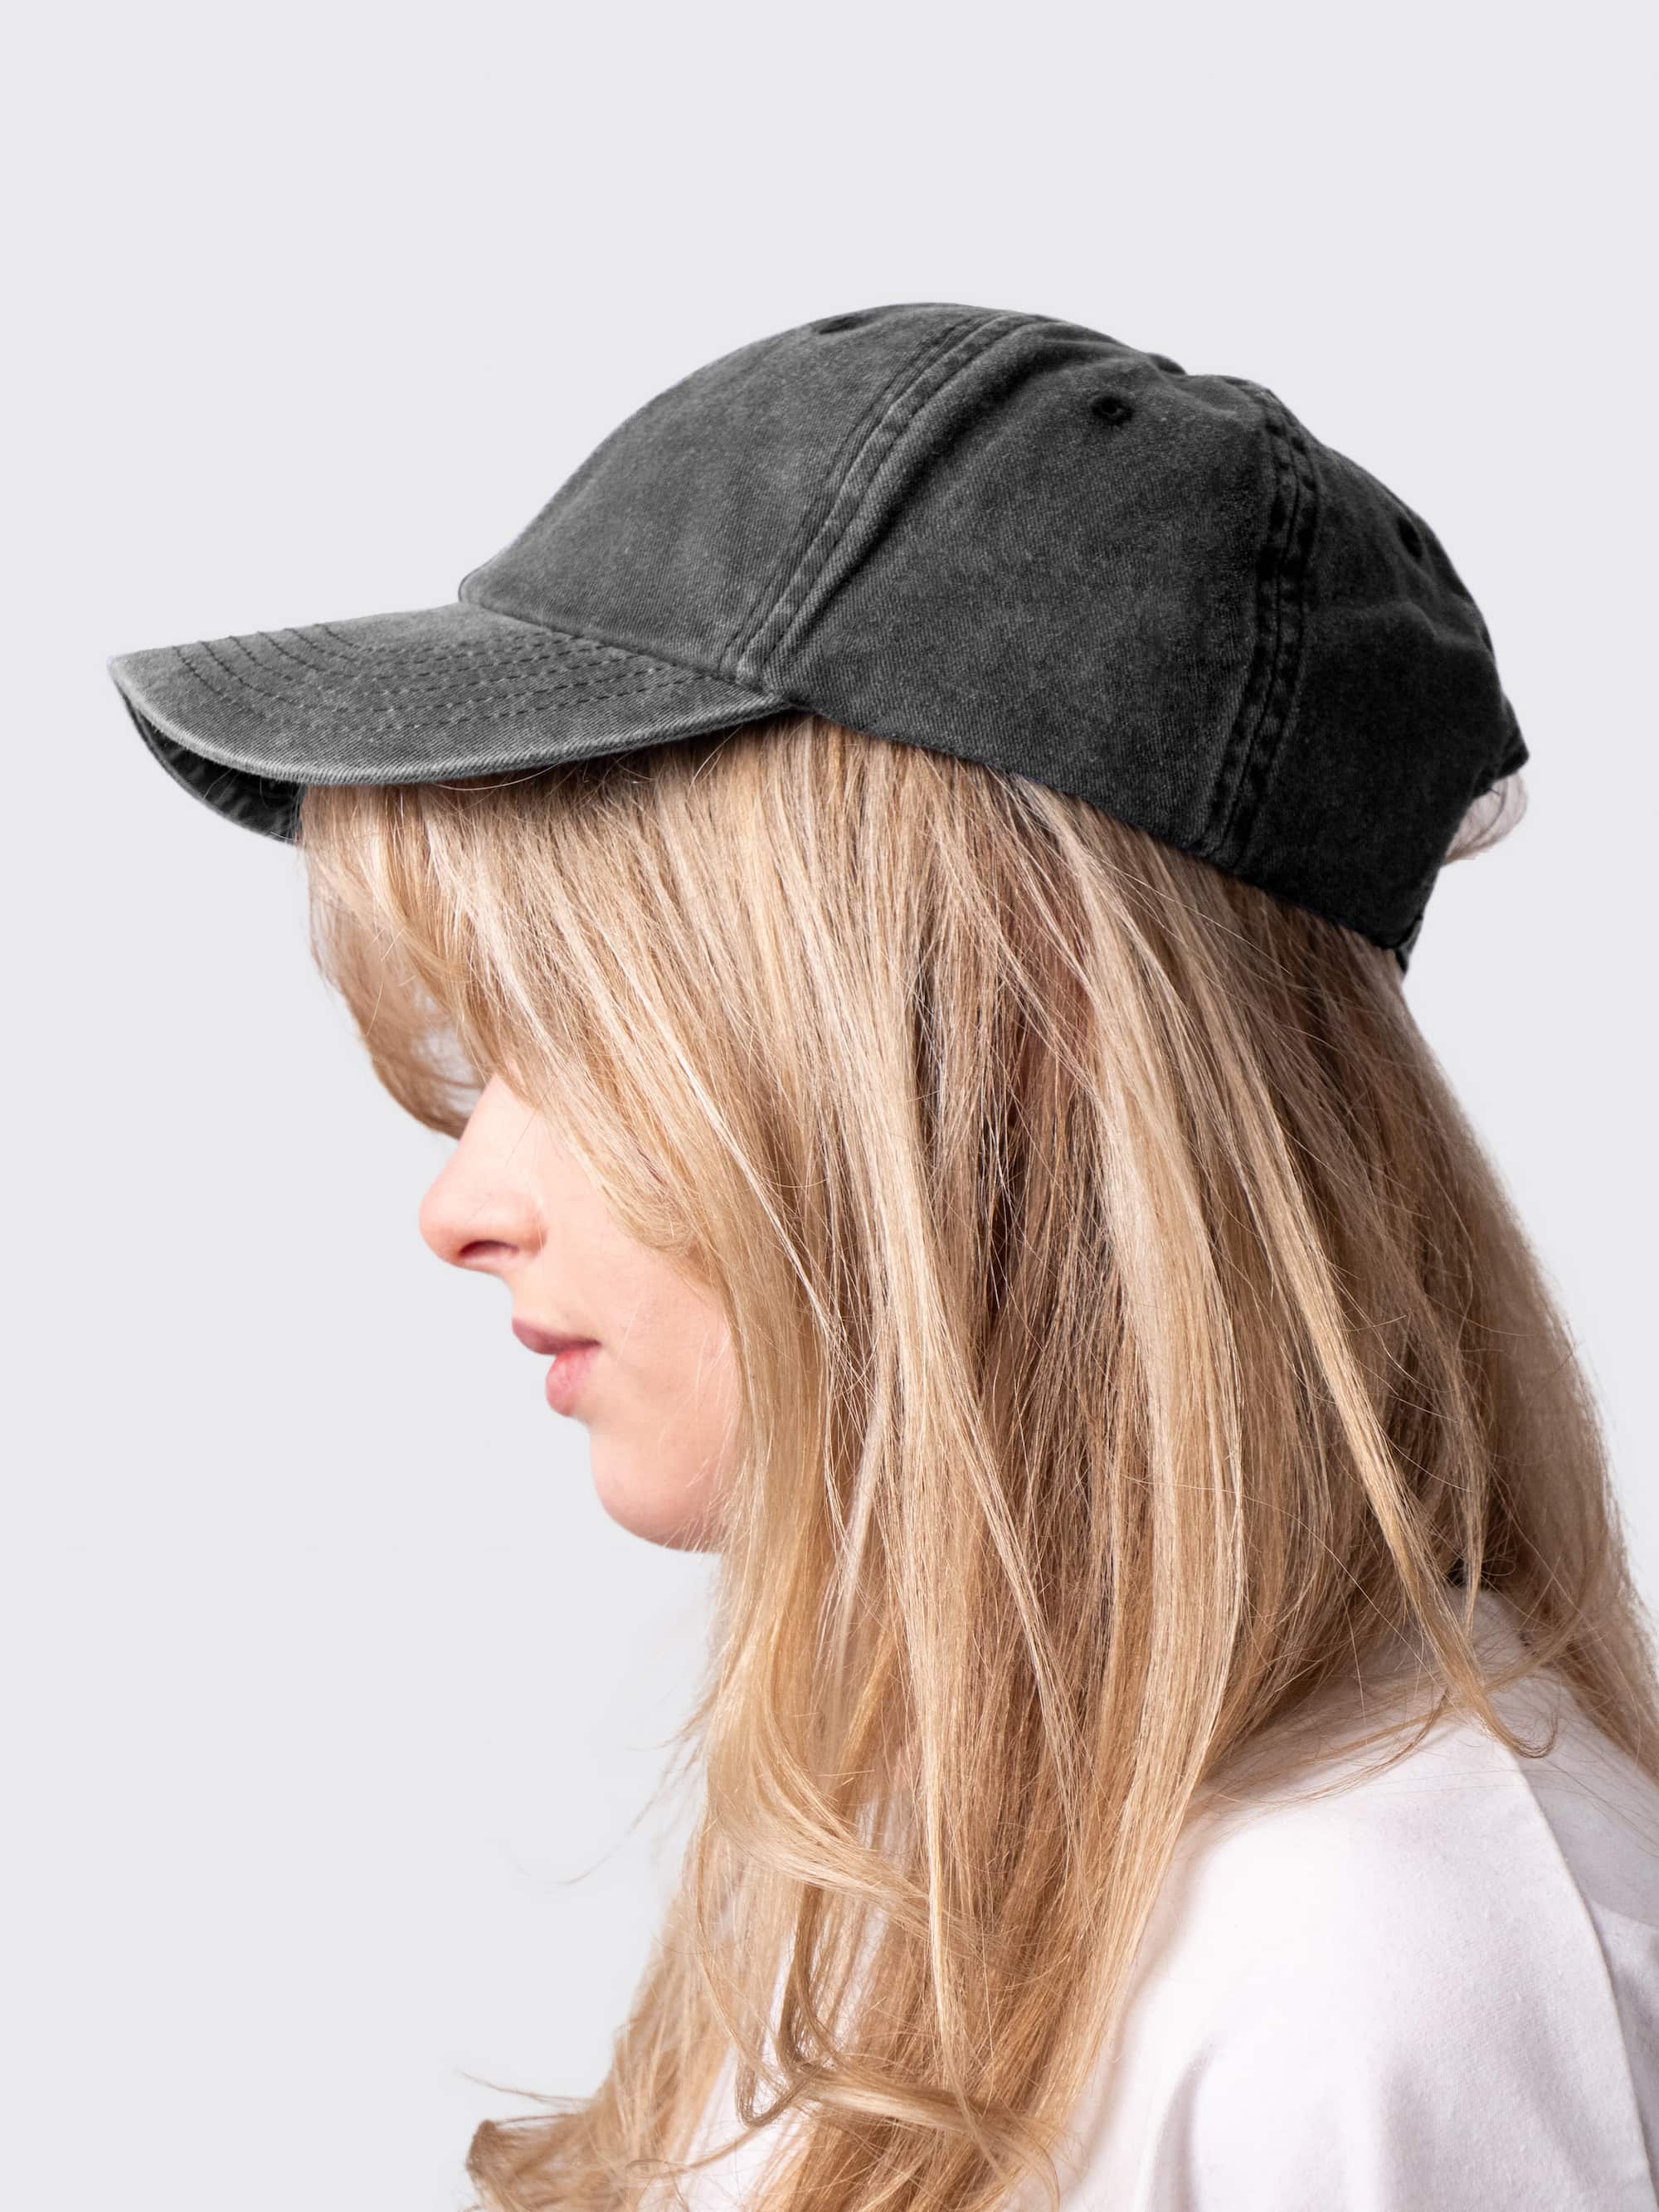 University of Cambridge washed black cotton cap, with brass buckle